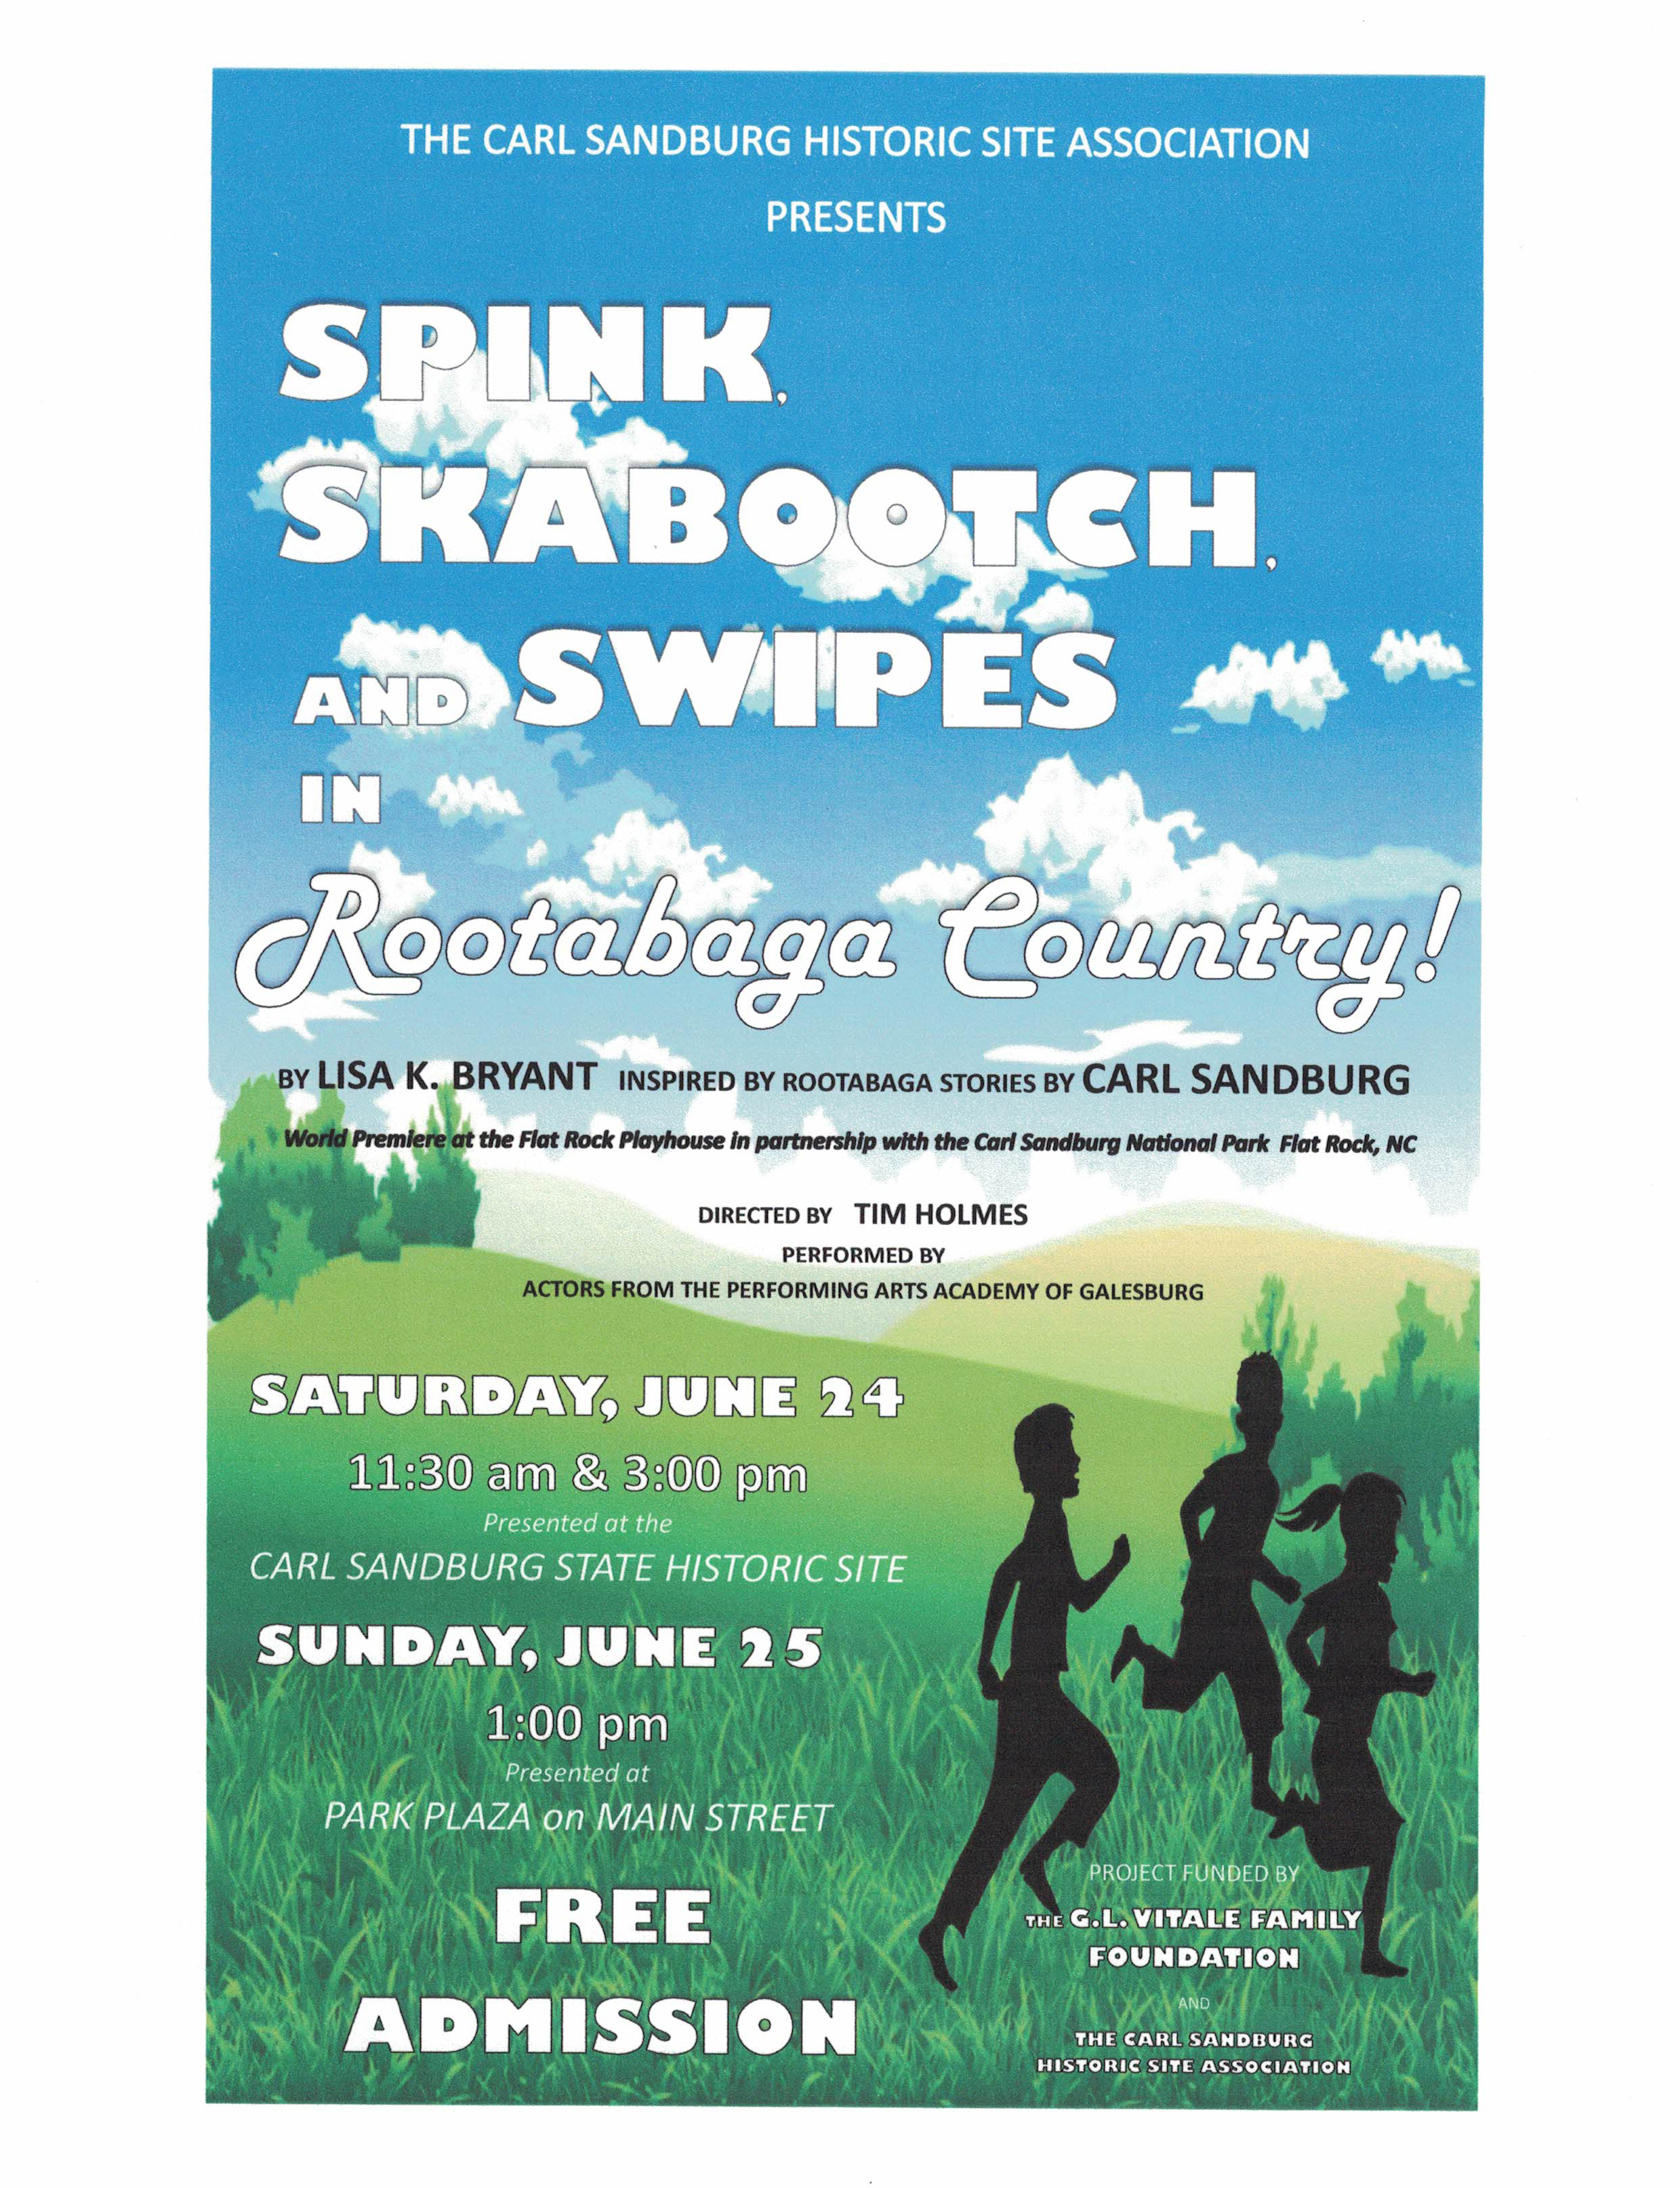 Spink, Skabooth & Swipes - Carl Sandburg Theater Troupe - June 24-25 - Galesburg, IL